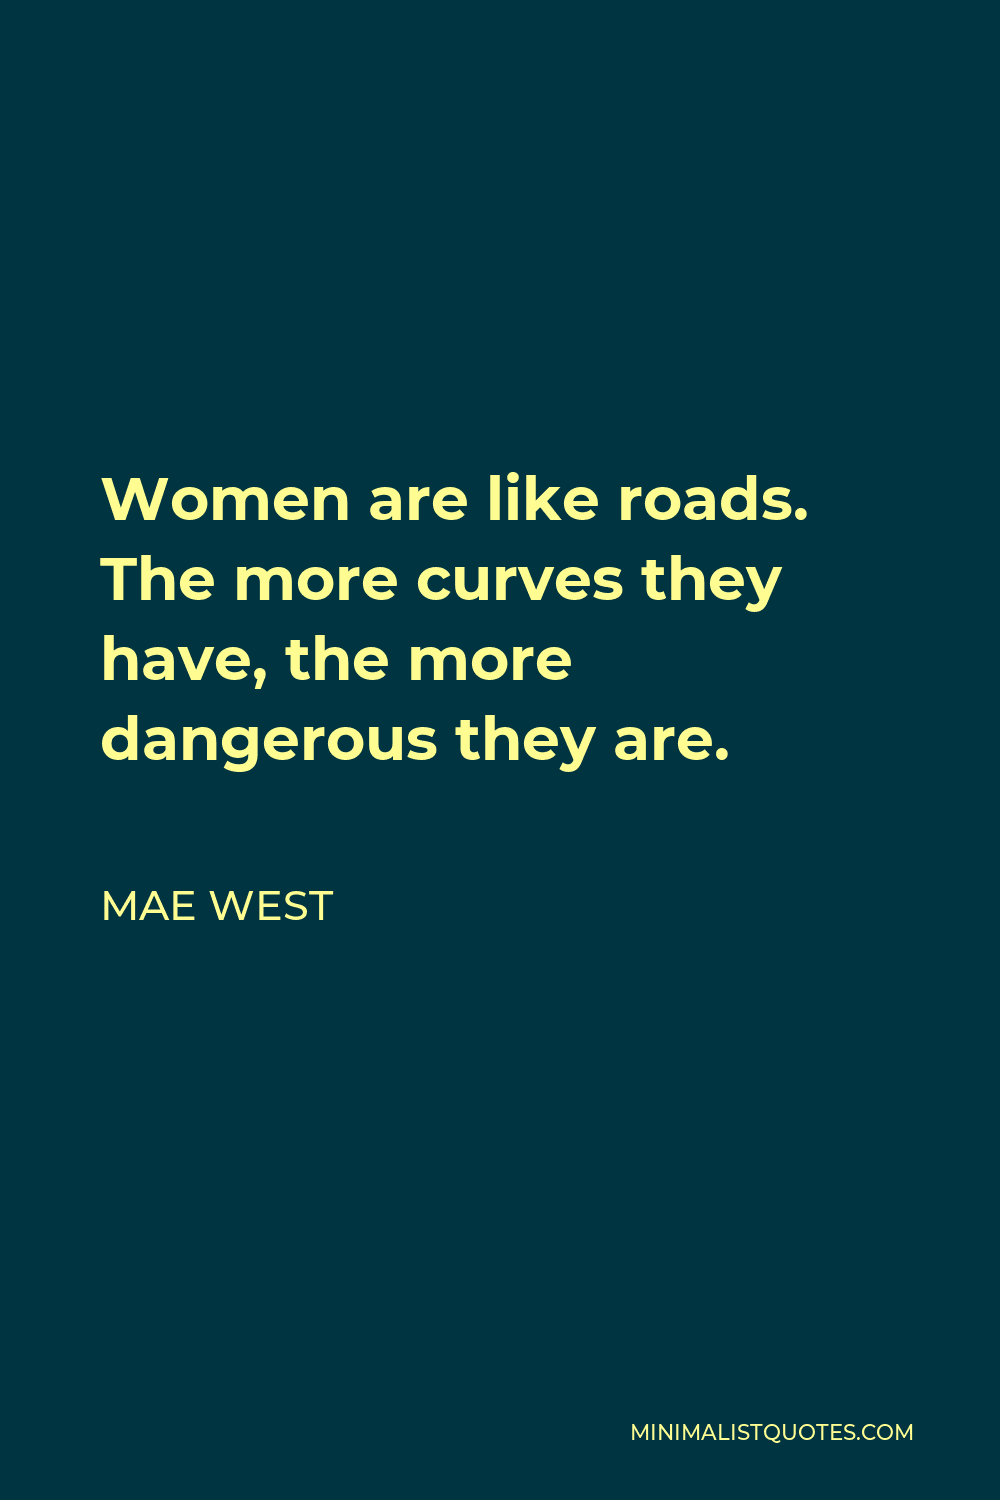 Mae West Quote - Women are like roads. The more curves they have, the more dangerous they are.